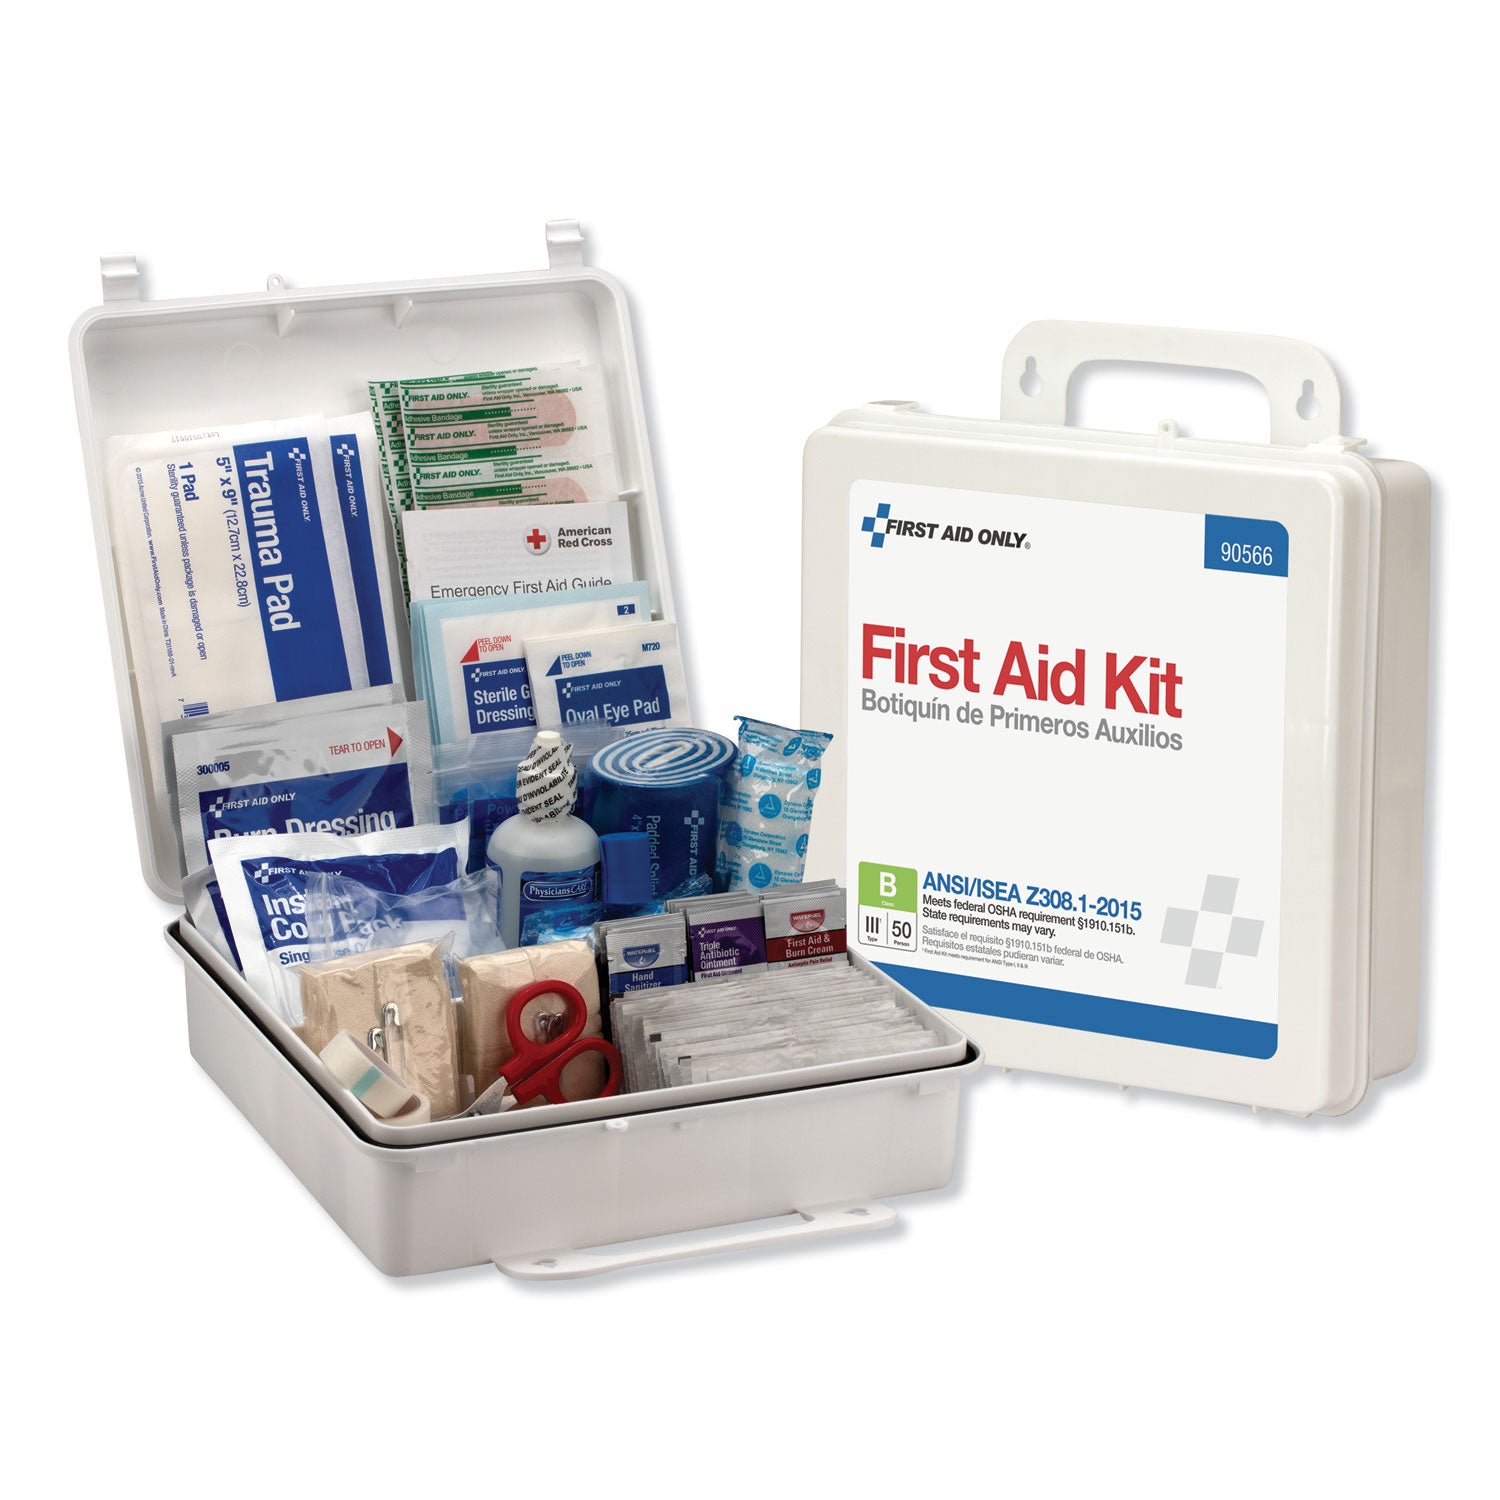 bulk-ansi-2015-compliant-class-b-type-iii-first-aid-kit-for-50-people-199-pieces-plastic-case_fao90566 - 1